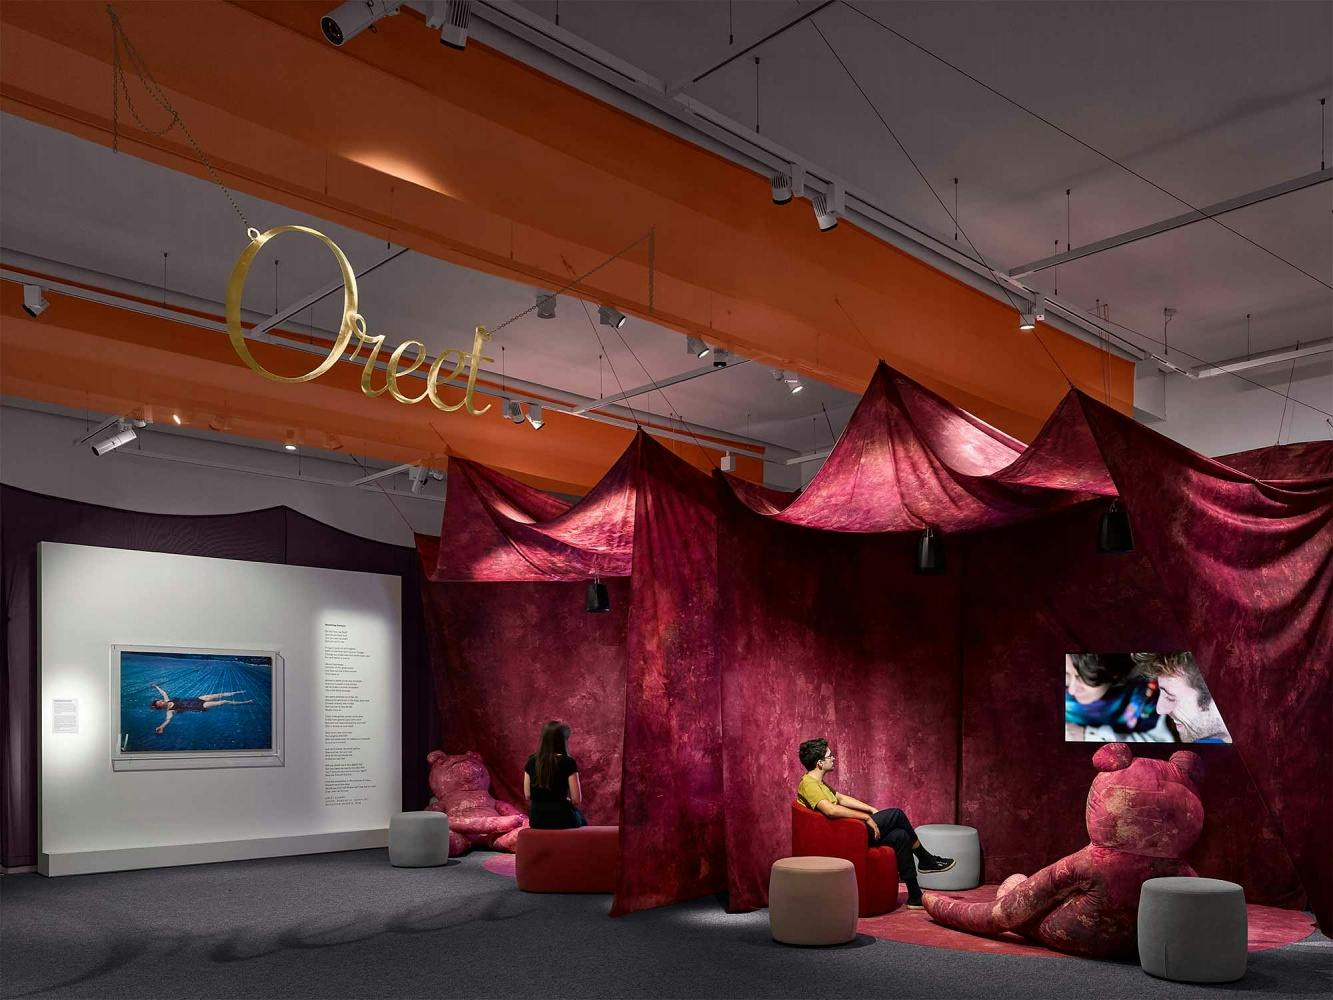 The installation includes photographs on walls of Jo Spence and lots of draped fabric creating a comforting environment. On the ceiling, Oreet Ashery's name is spelled out in gold. In the background is a large photograph of Jo Spence floating in water. In the foreground people watch TV screens surrounded by giant teddy bears. 